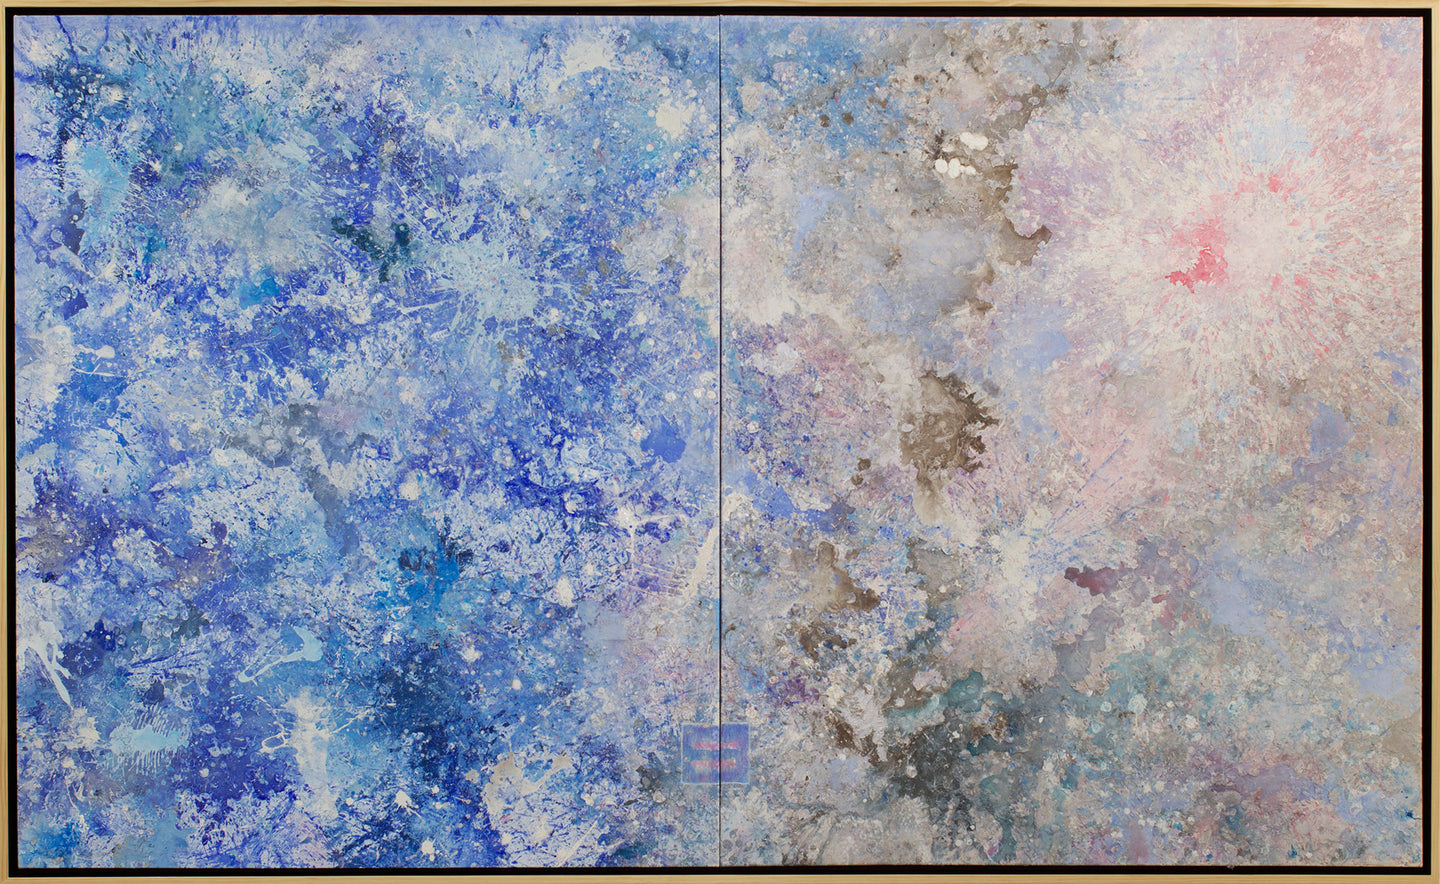 Jill Krutick (B. 1962 - ) Dreamscape Surprise, 2016 Acrylic on Canvas72 x 120 inches in  2 panels, 72 x 60 inches each.  Framed: 74 x 122 inches   With pigments that appear to melt and billow across the canvas, this work depicts the dynamic forces that define the unparalleled powers of the ocean.This is large abstract painting in Blue and white and pink. Manolis Projects gallery in Miami, FL